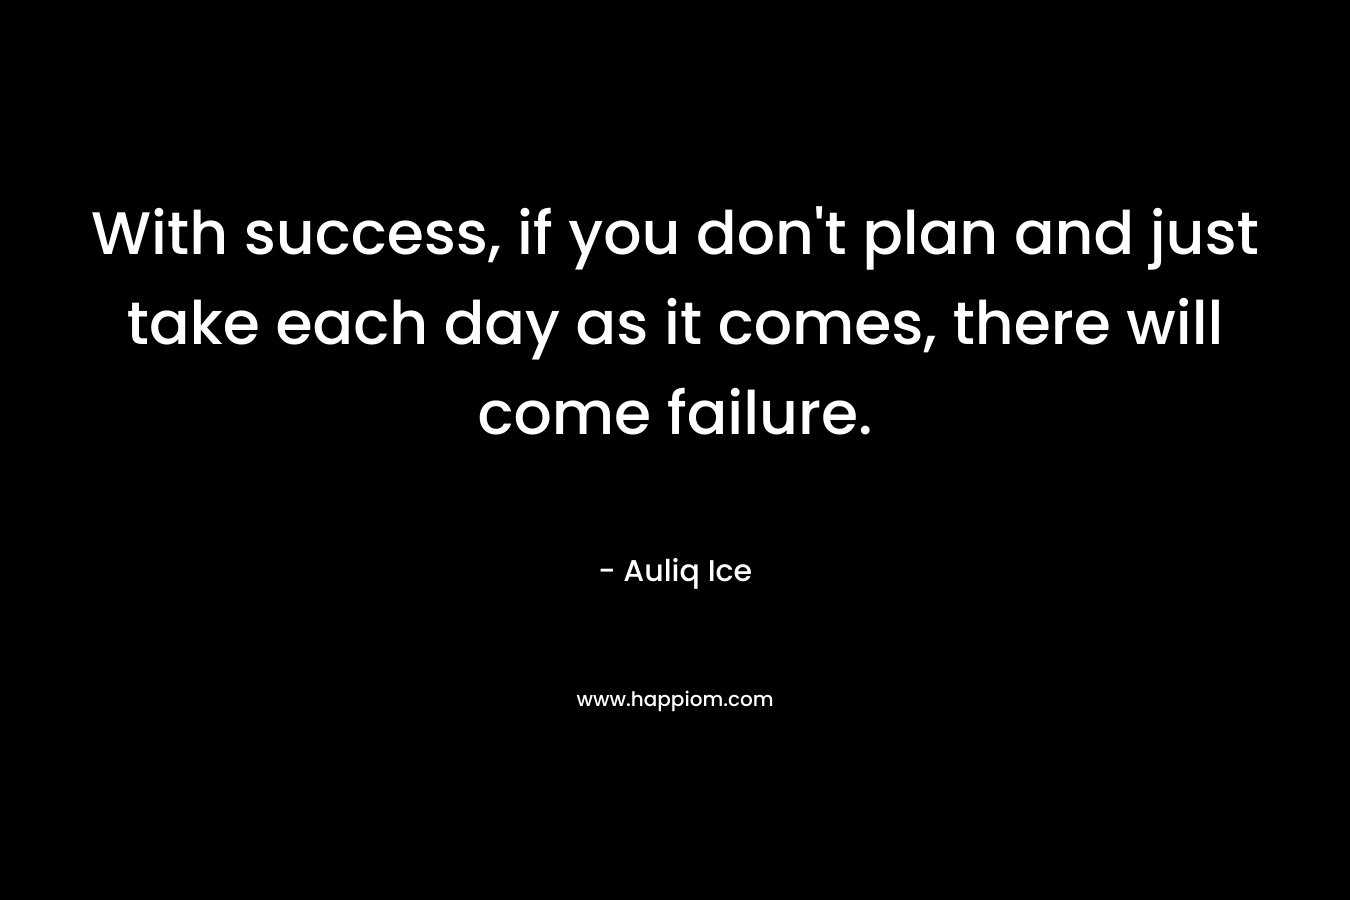 With success, if you don't plan and just take each day as it comes, there will come failure.